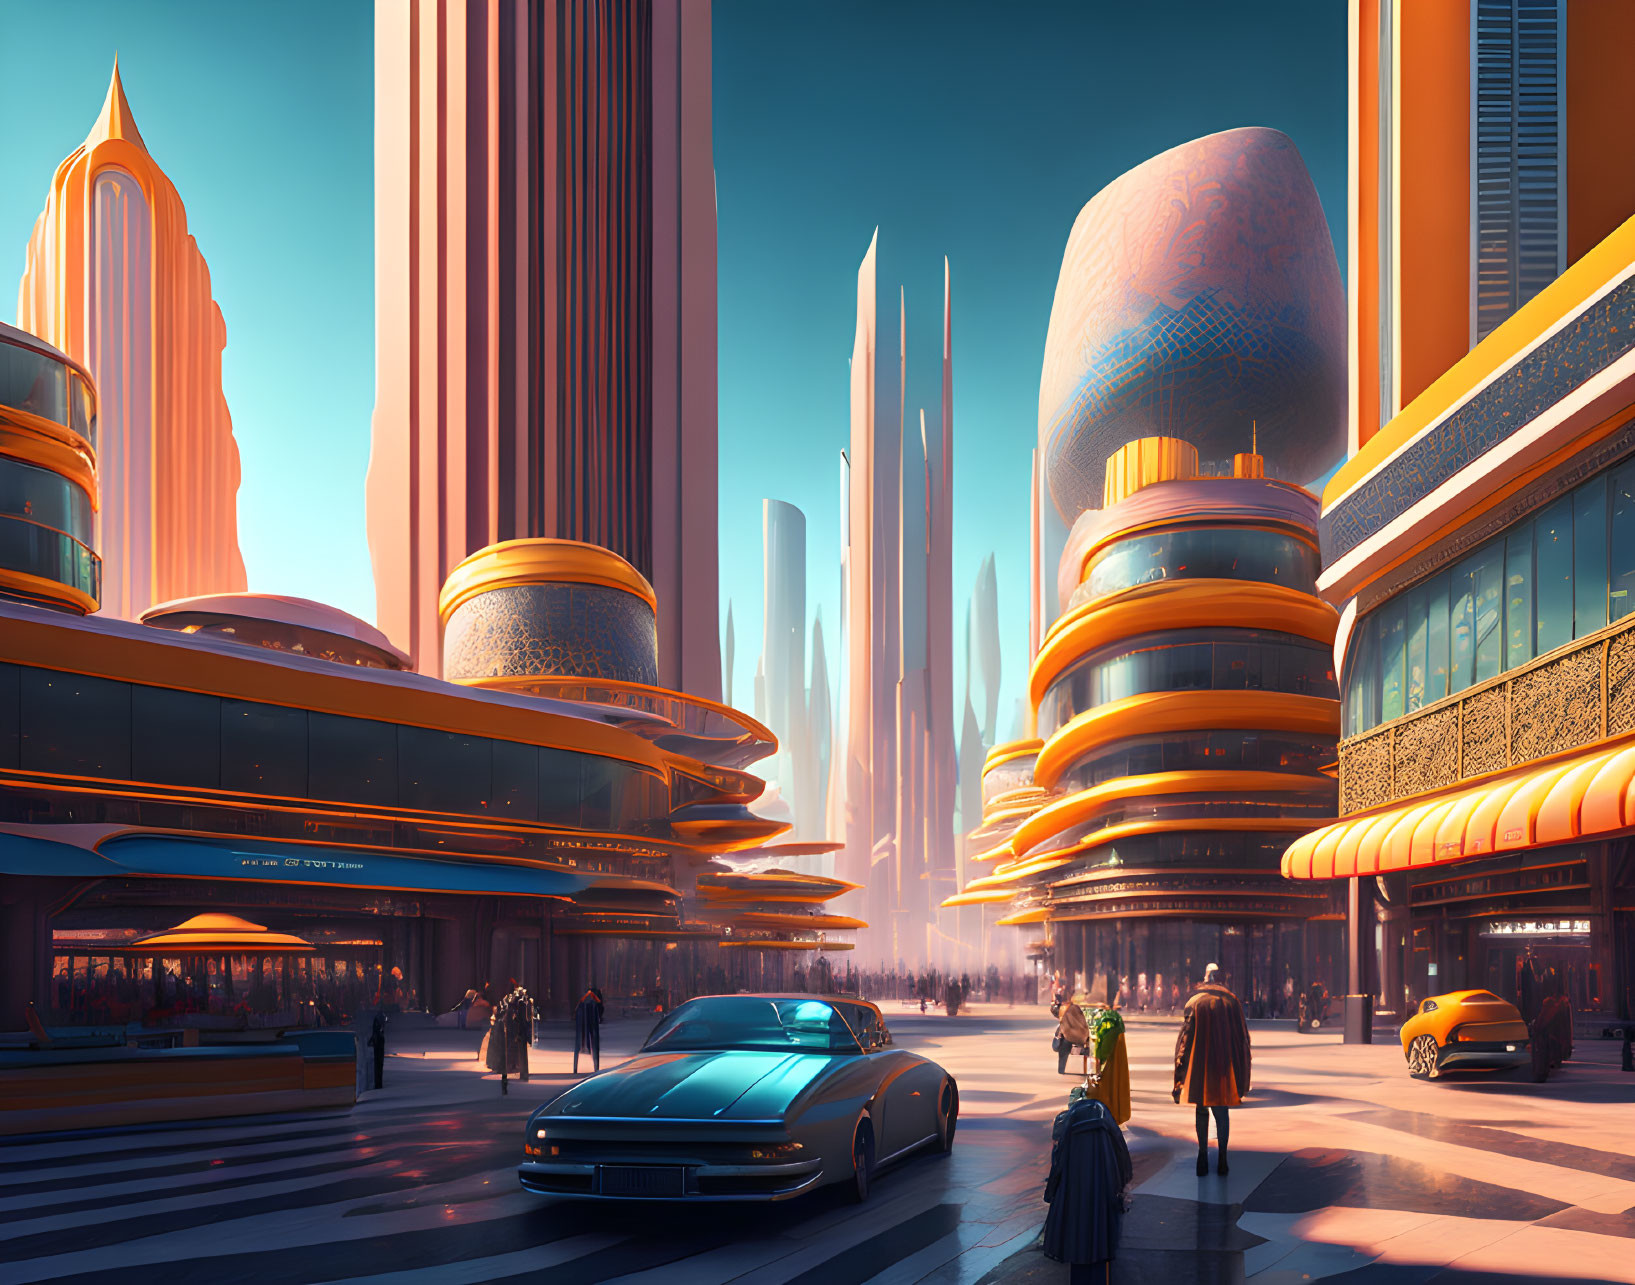 Futuristic cityscape with skyscrapers, vehicles, pedestrians in orange and blue setting